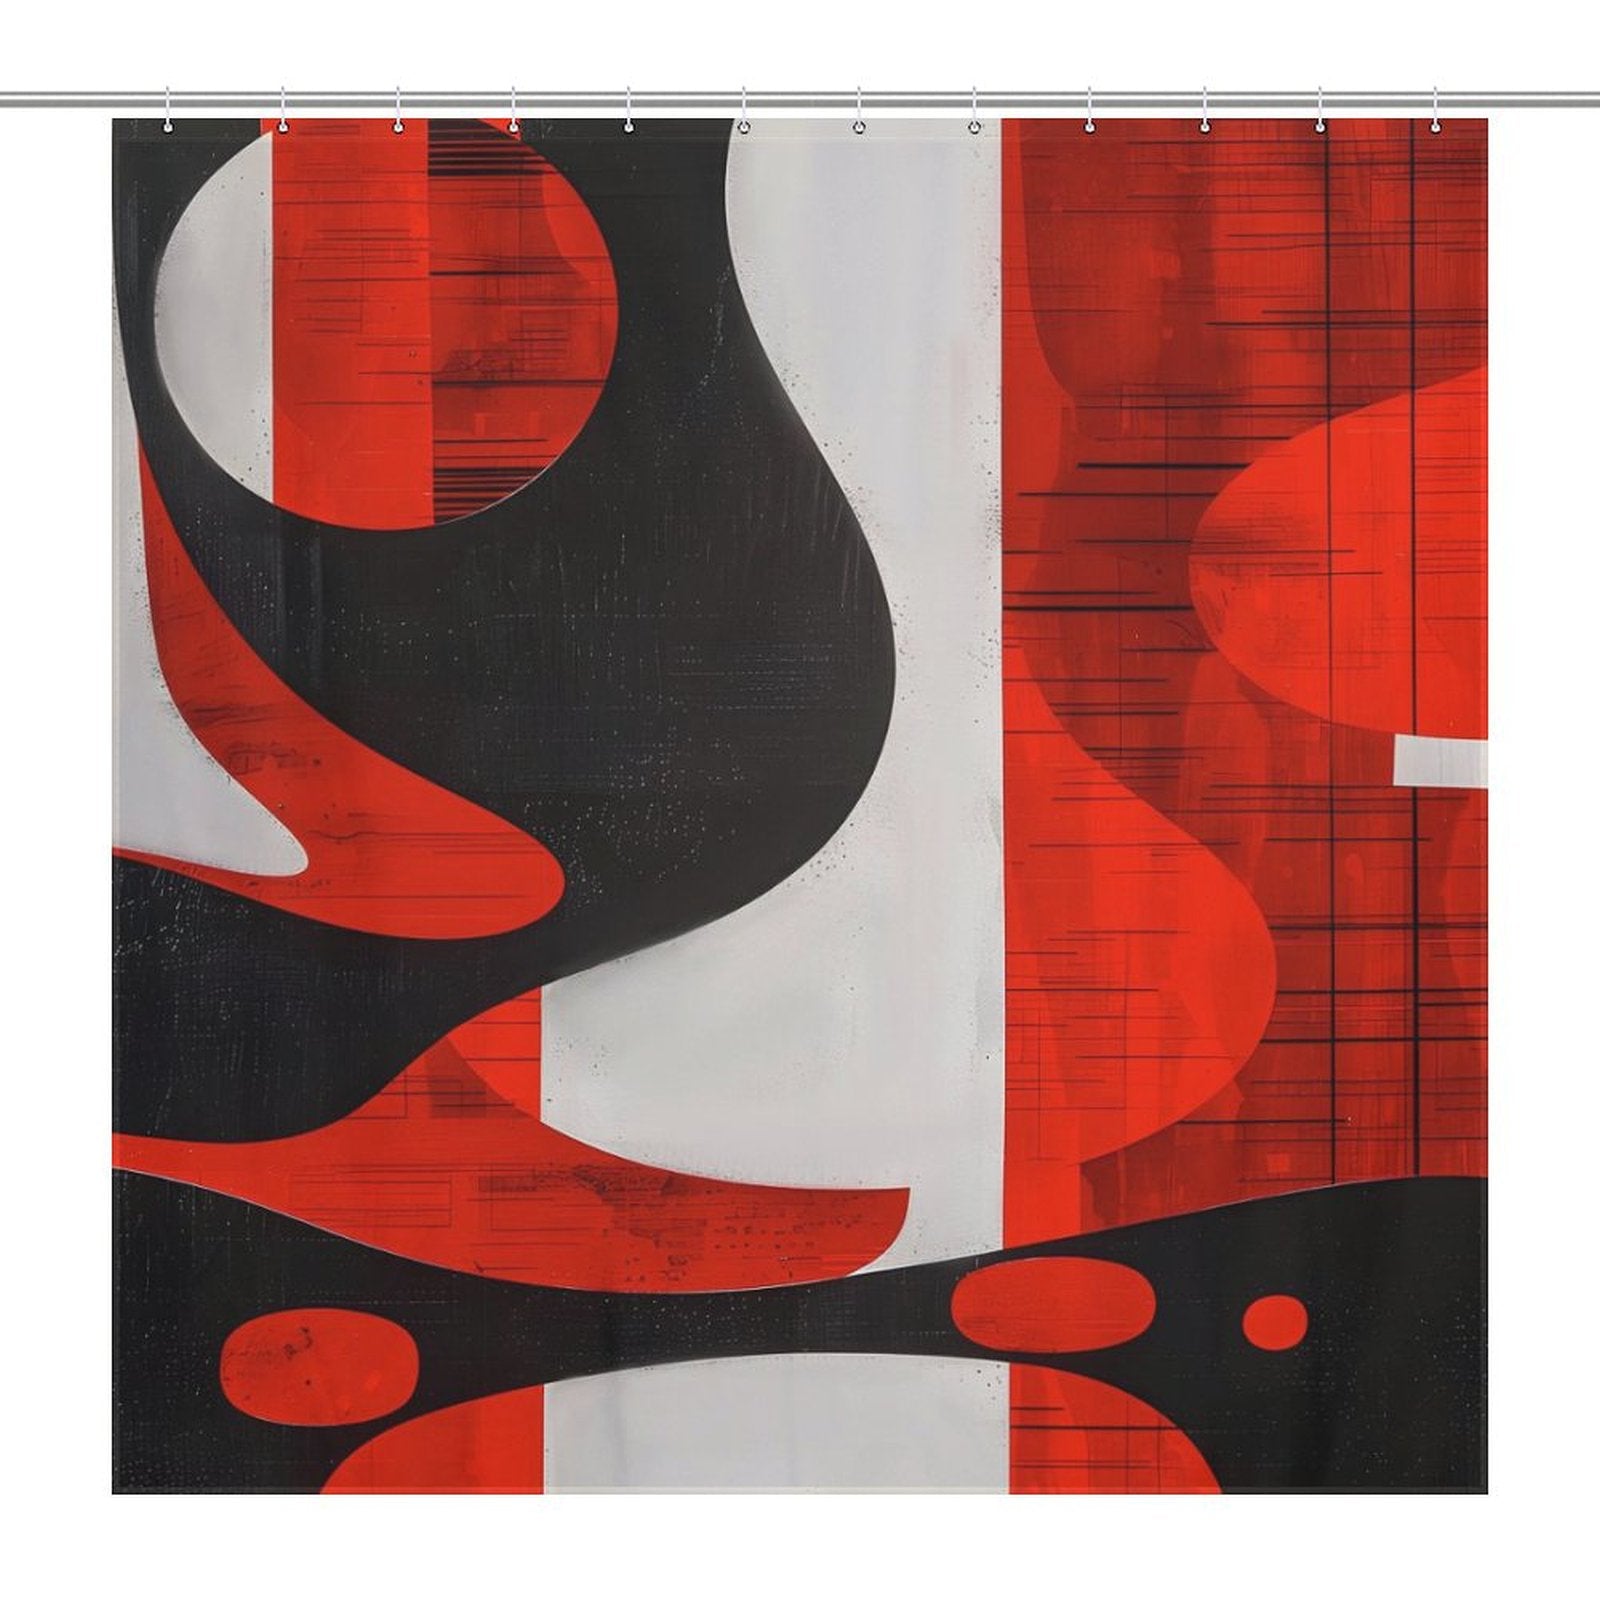 A Cotton Cat Mid Century Modern Geometric Art Minimalist Grey Red and Black Abstract Shower Curtain-Cottoncat featuring an abstract design with dominant elements in red, black, and white, incorporating fluid shapes and vertical lines.